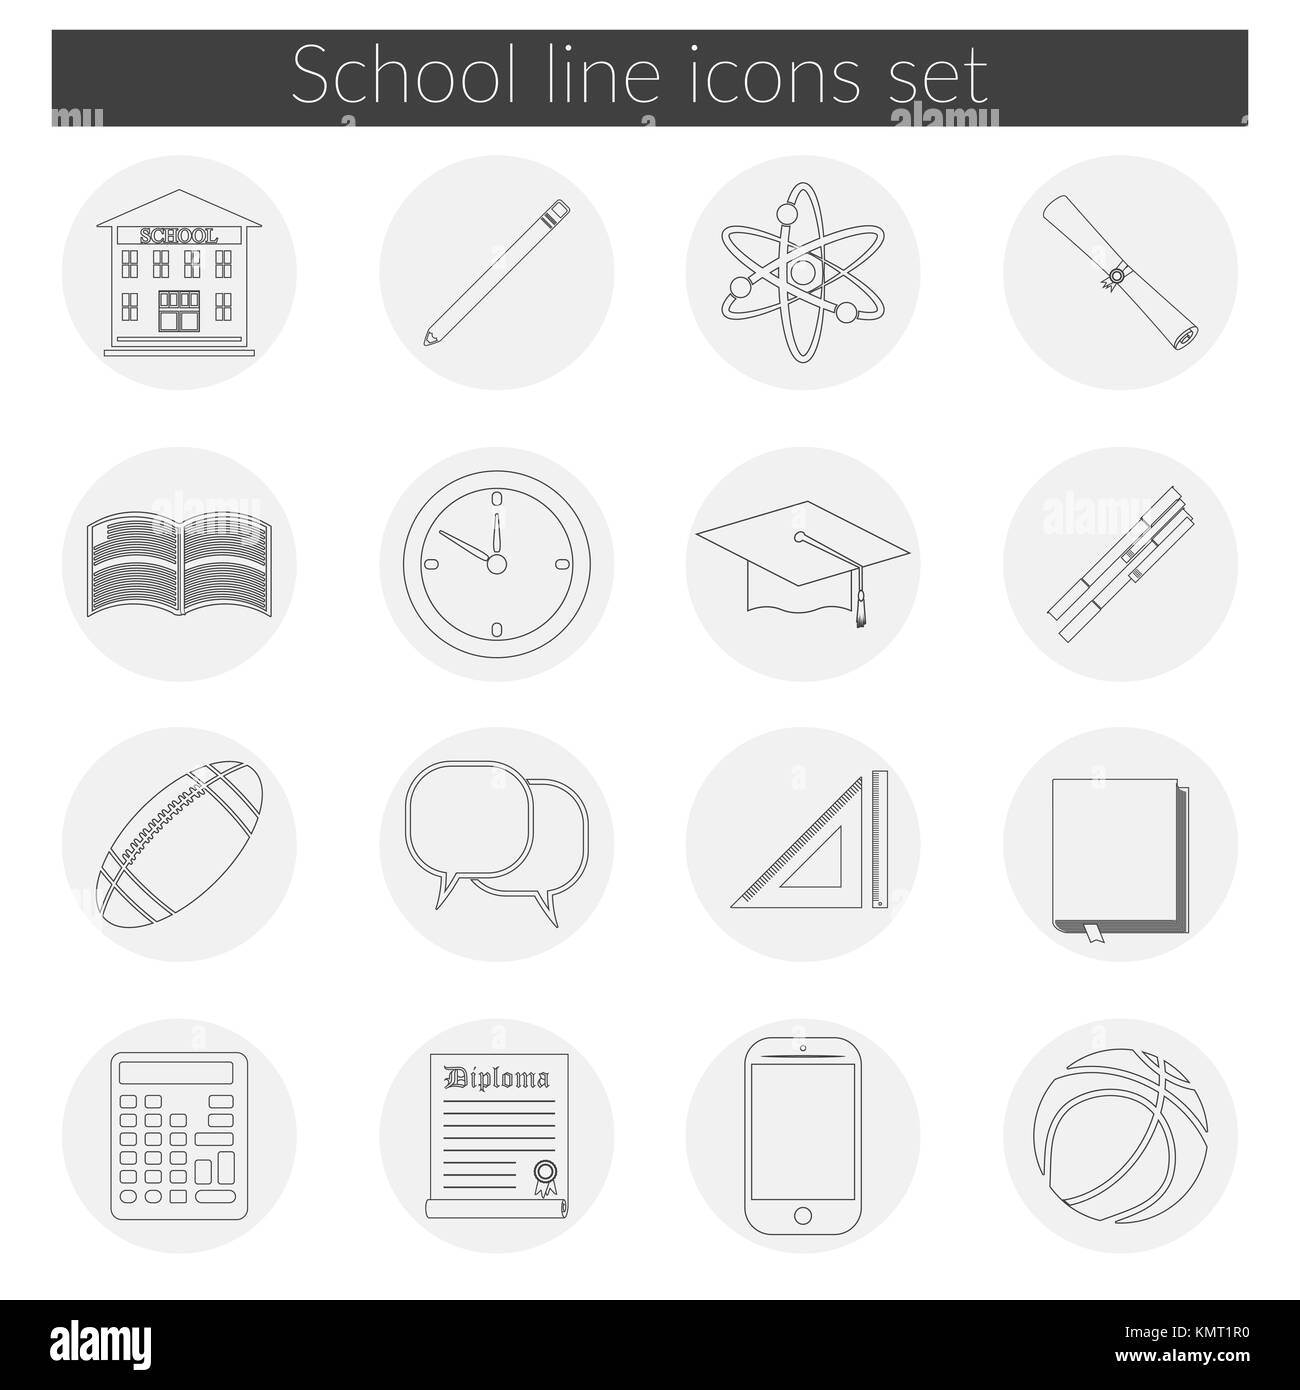 Back to School icon vector set, school building, pen, pensil, sport items, diploma and graduation cap icons, isolated silhouets Stock Vector